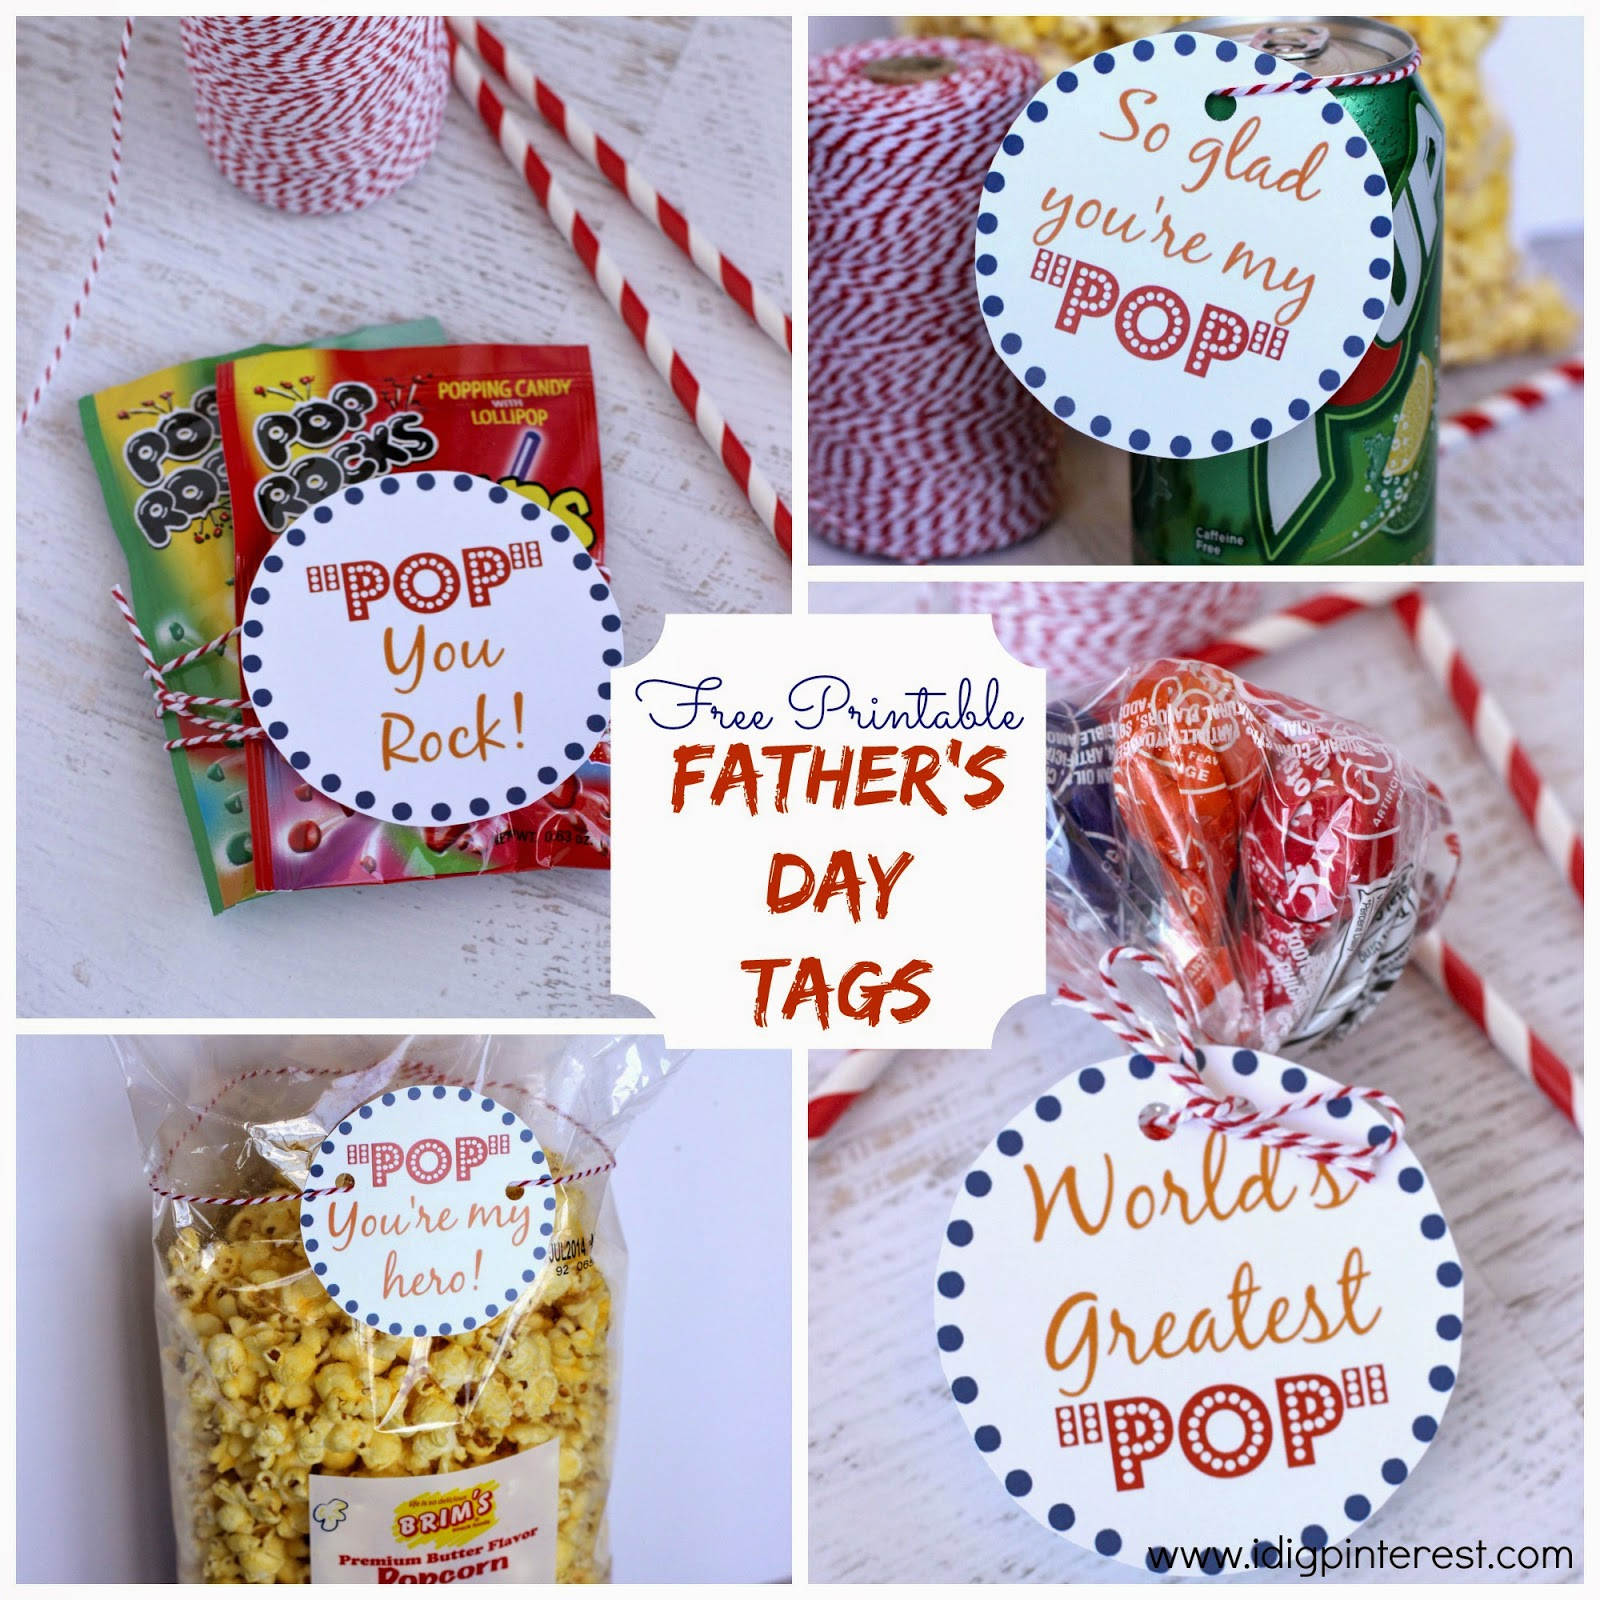 Inexpensive Mother'S Day Gift Ideas For Church
 Father s Day "POP" Free Printables I Dig Pinterest